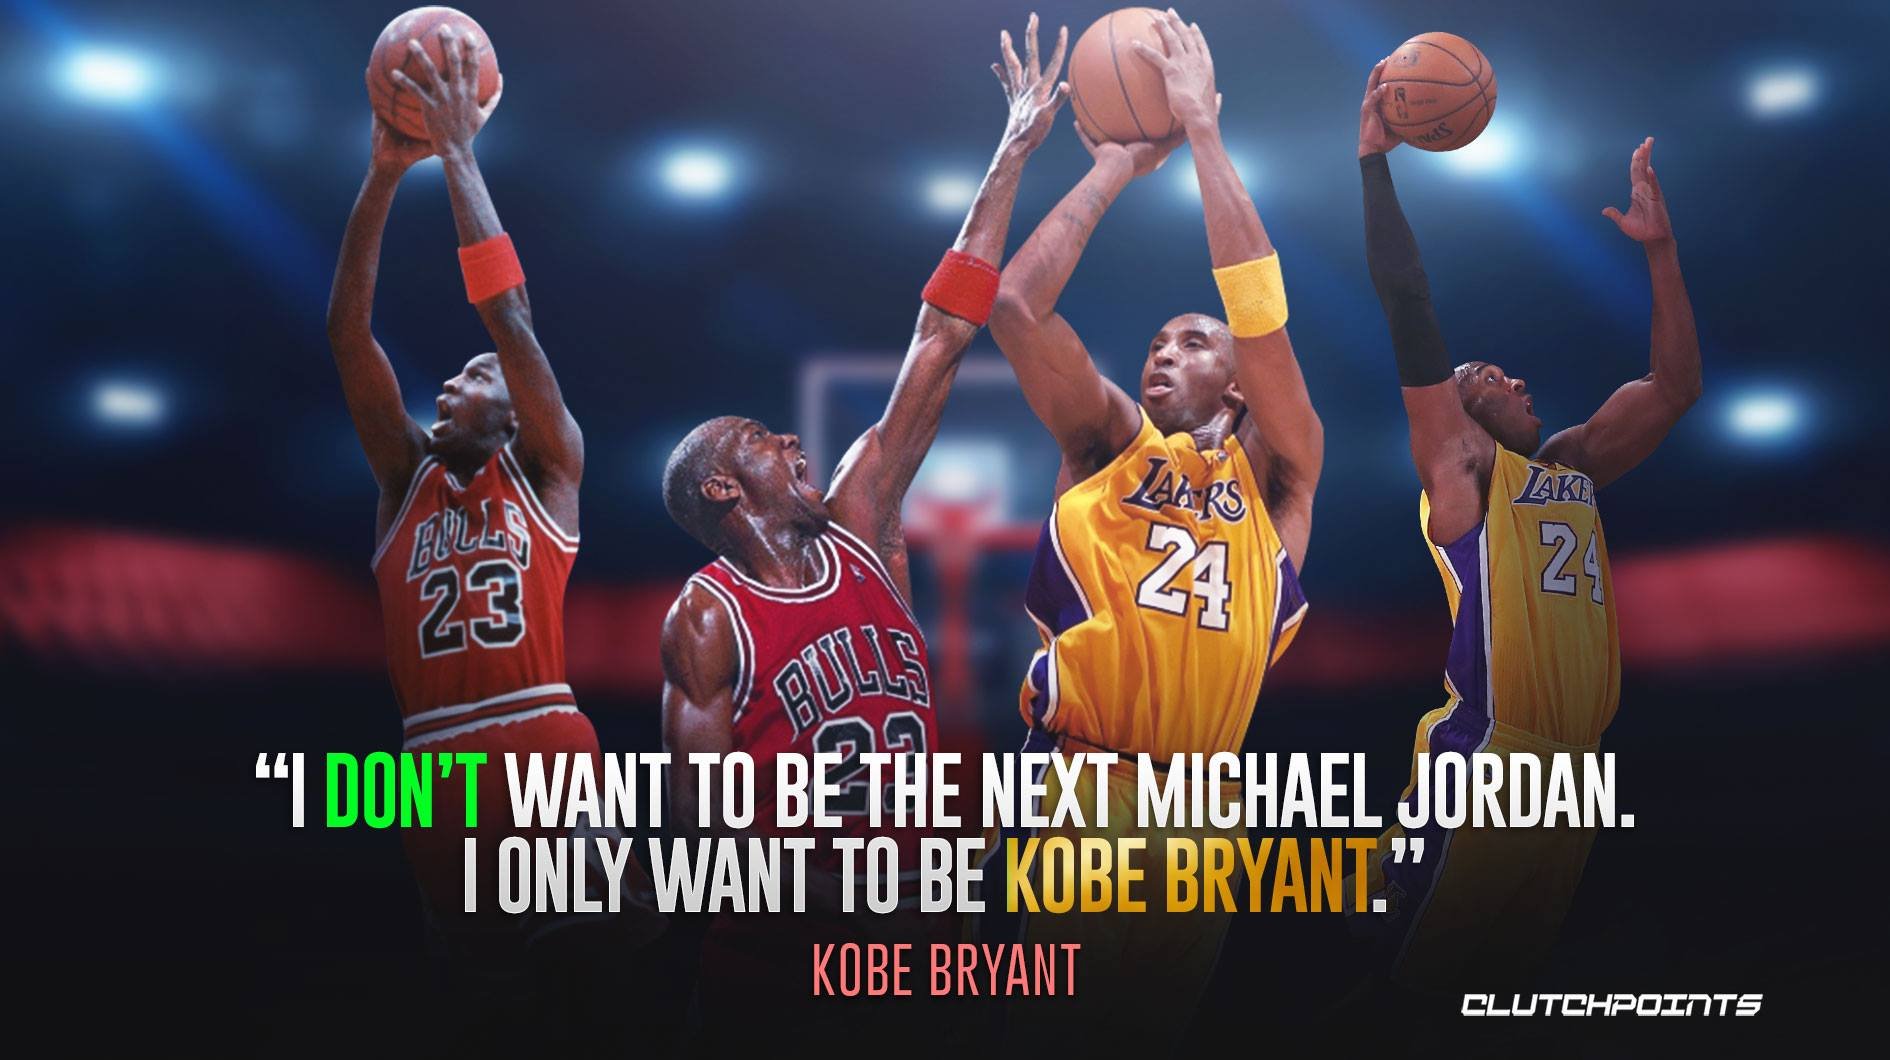 I don't to be the next Micheal jordan i only want to be kobe